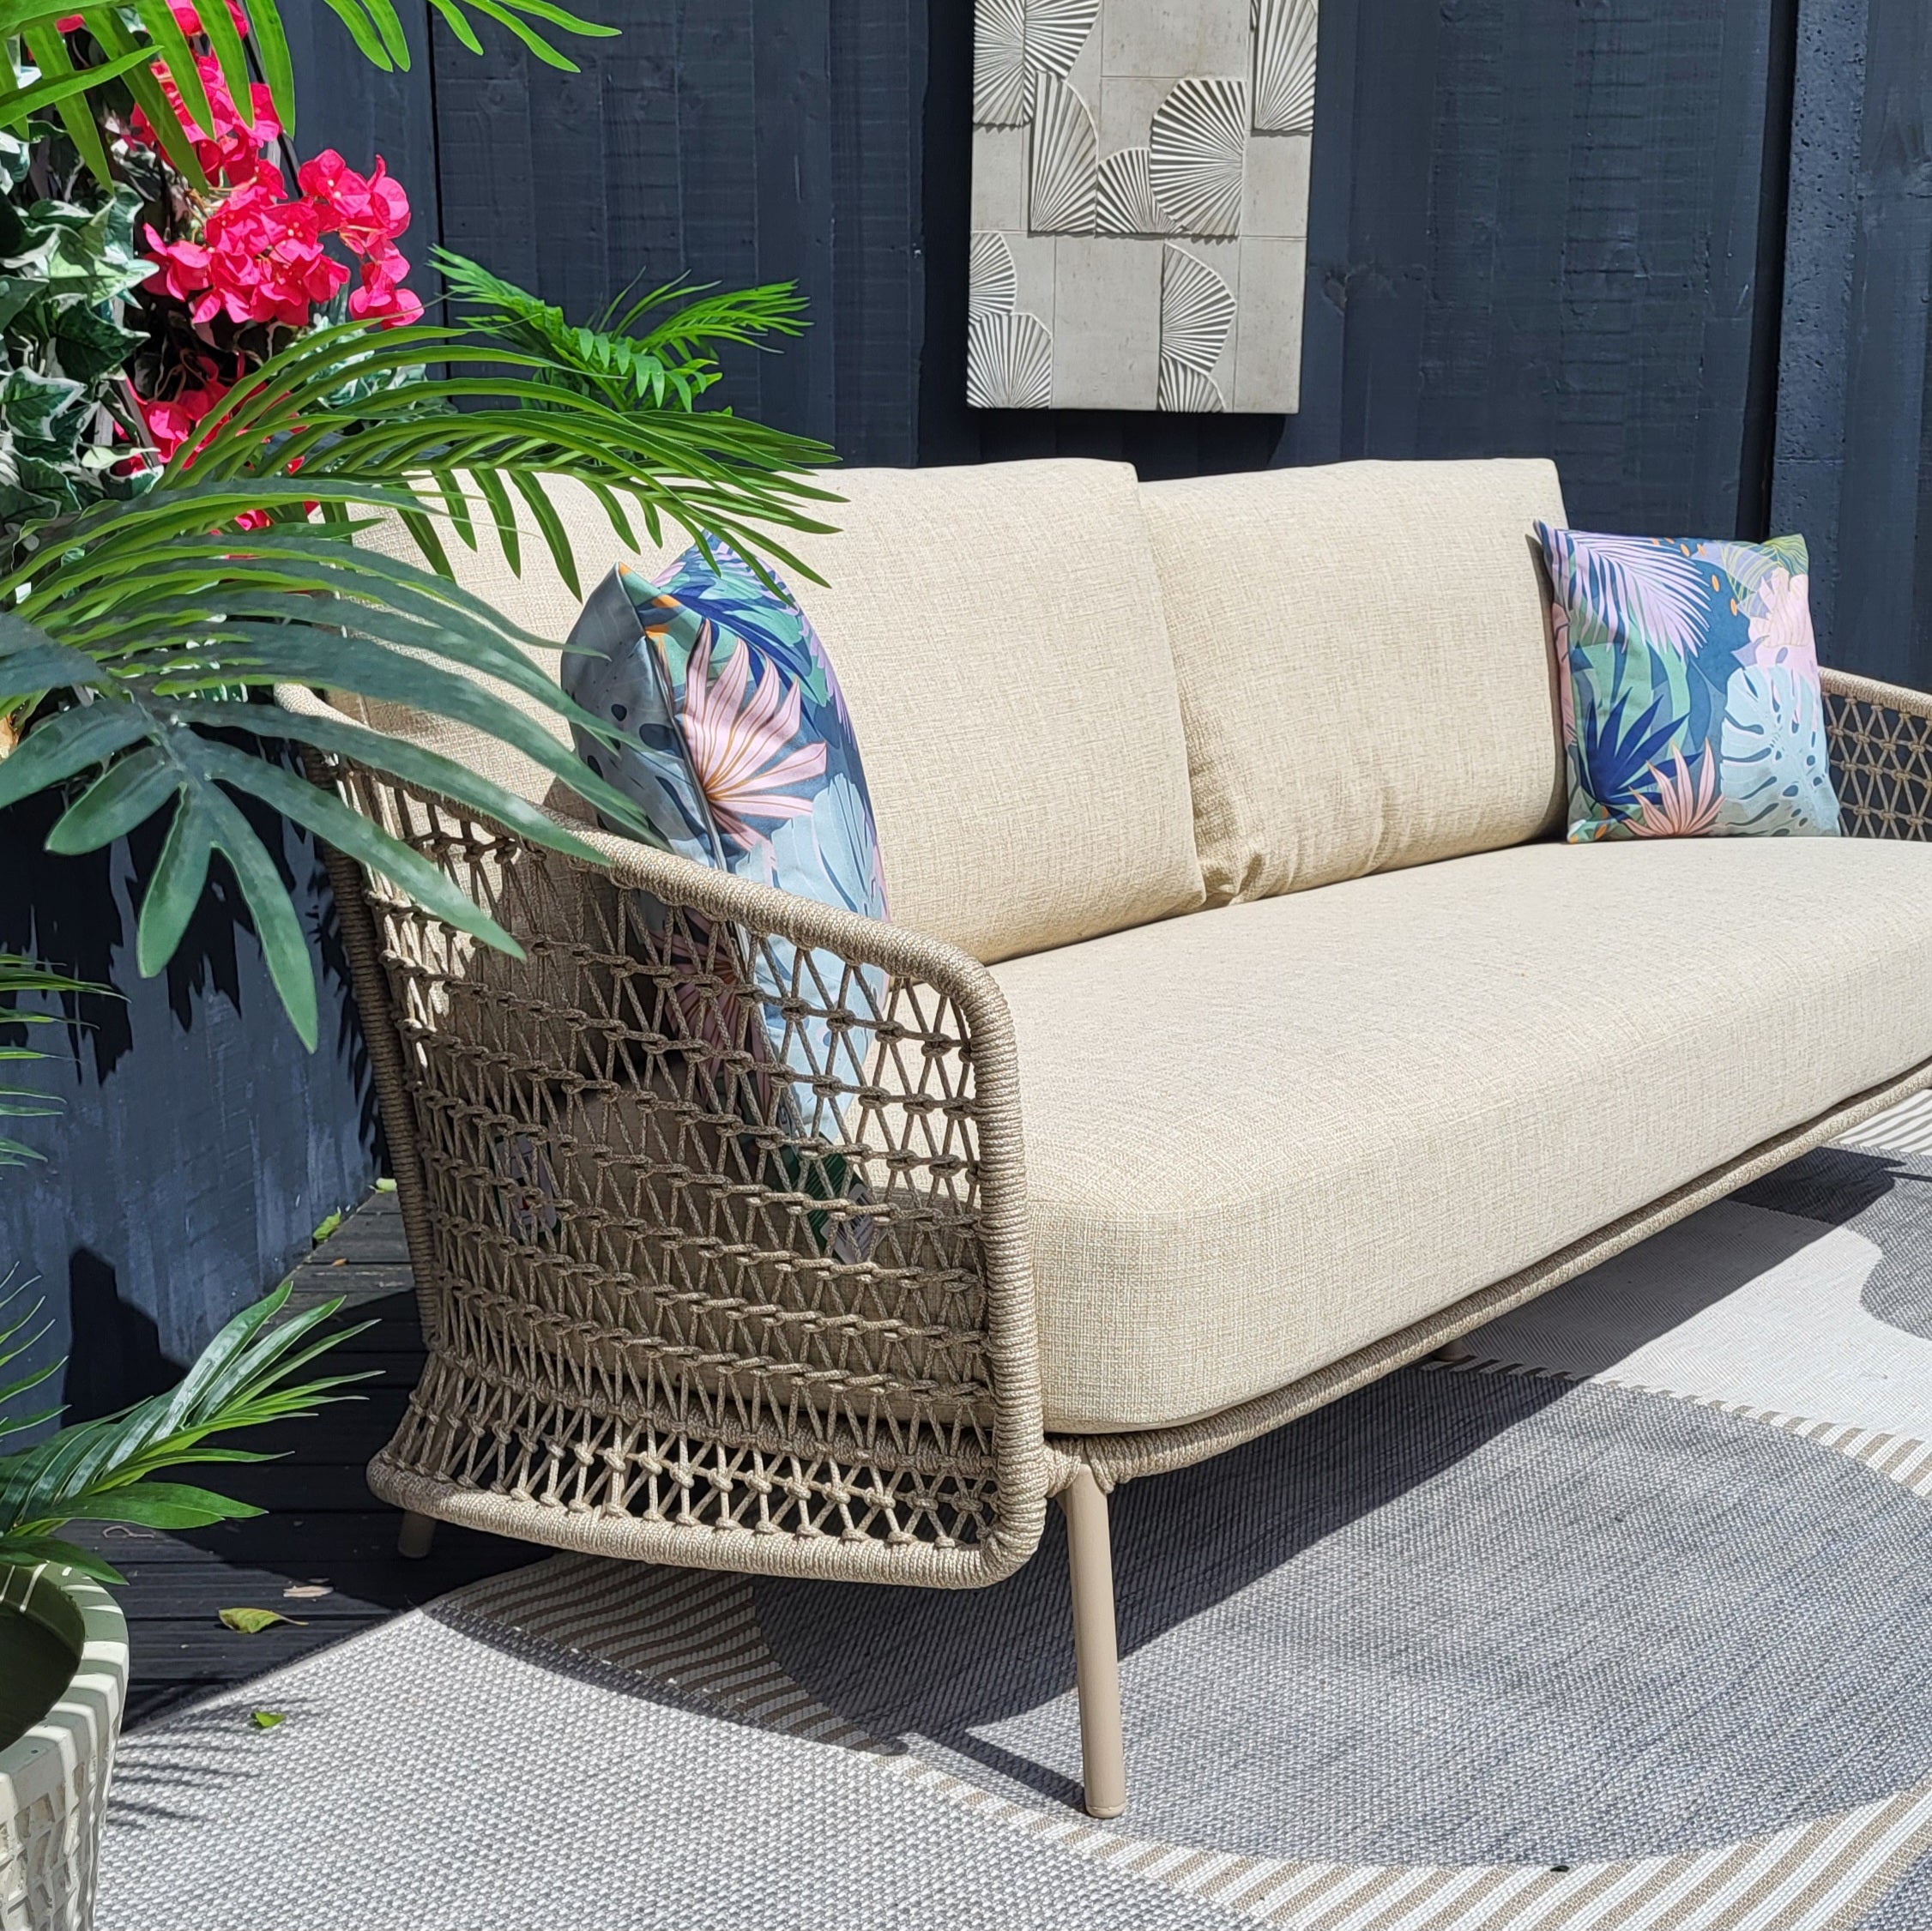 Puccini Outdoor Lounge 3 Seat Sofa by 4 Seasons Outdoor